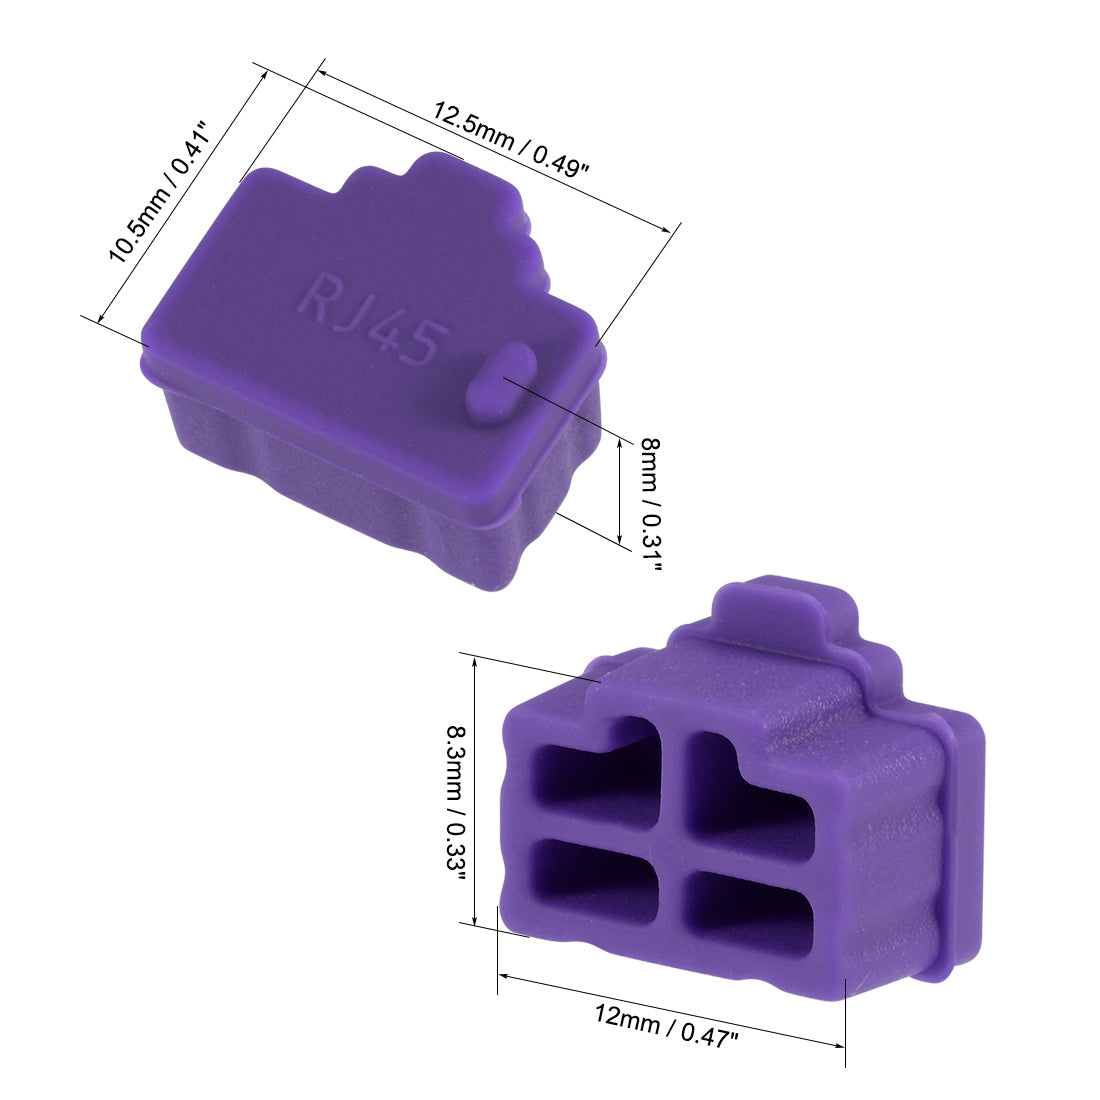 uxcell Uxcell 20pcs RJ45 Silicone Protectors Ethernet Hub Port Anti Dust Cap Cover, Purple